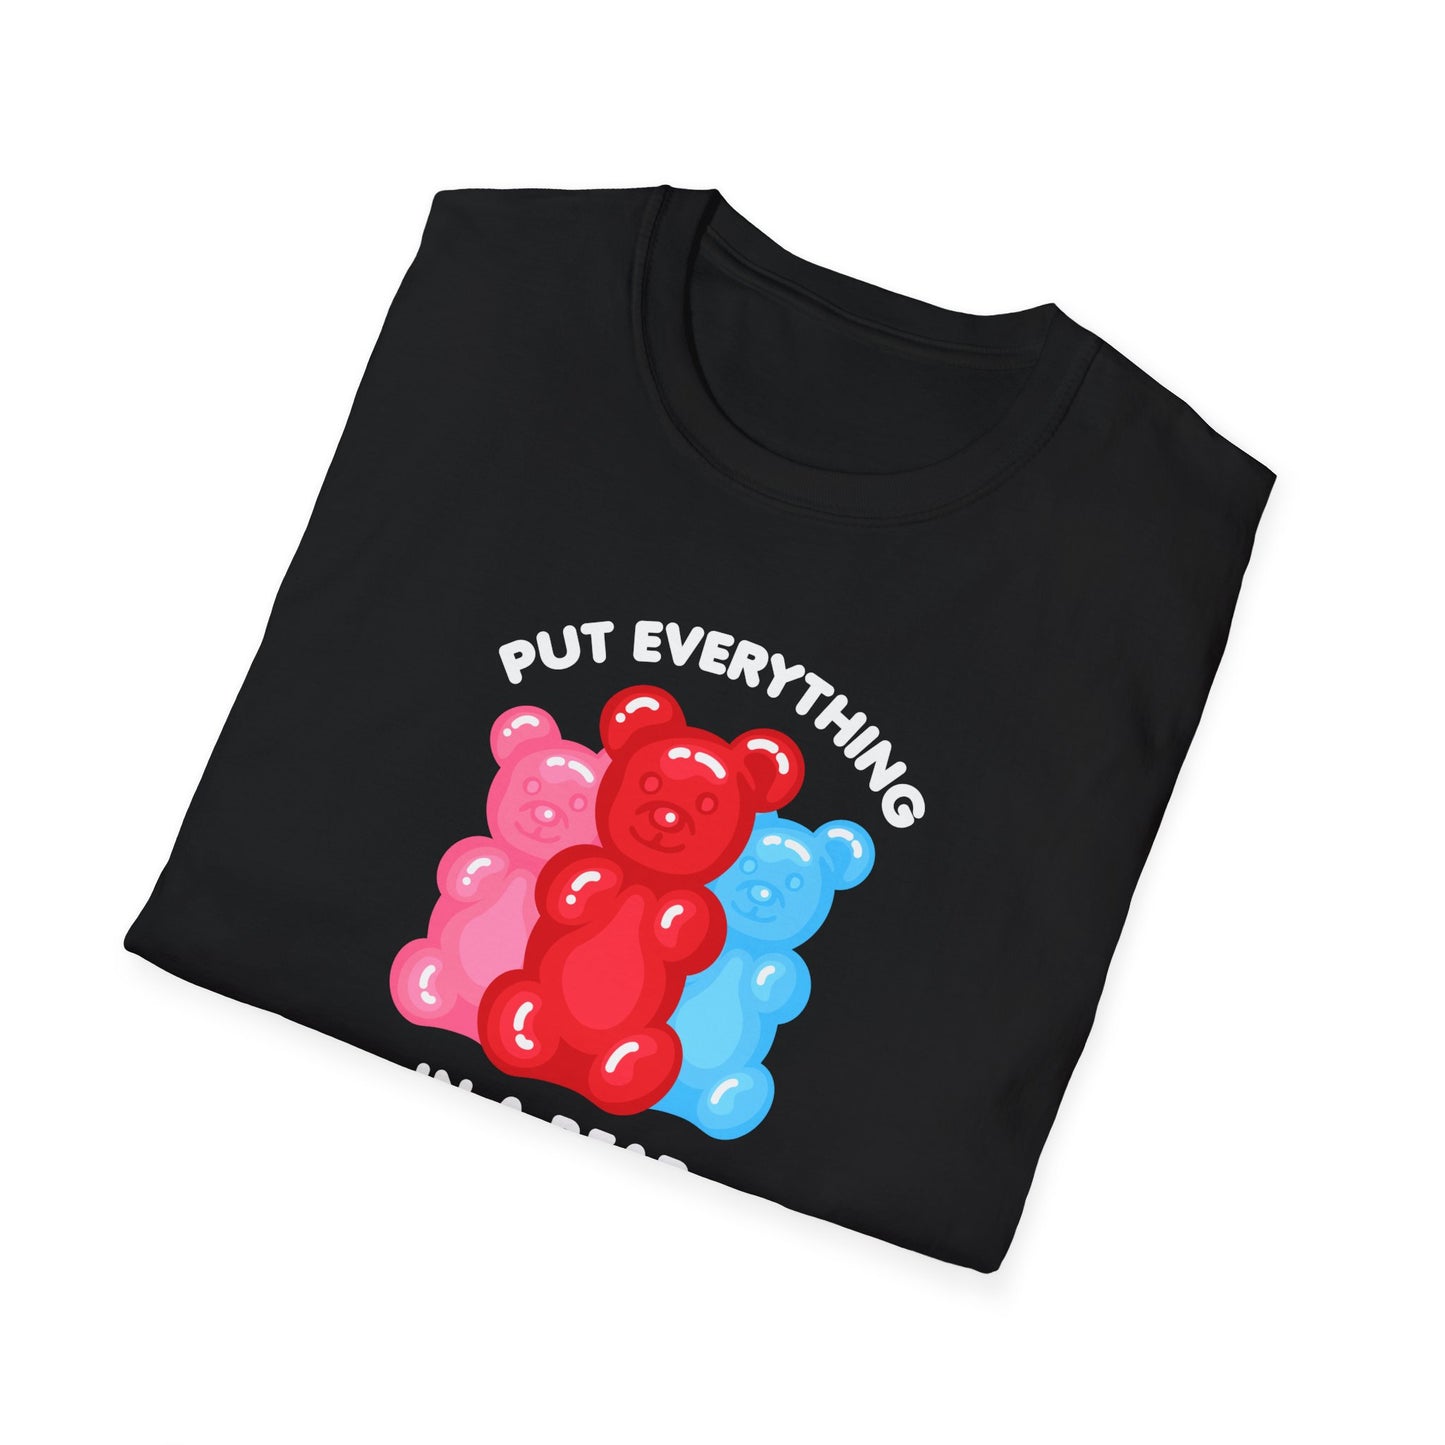 Put Everything In A Bear Gummies Unisex Softstyle T-Shirt